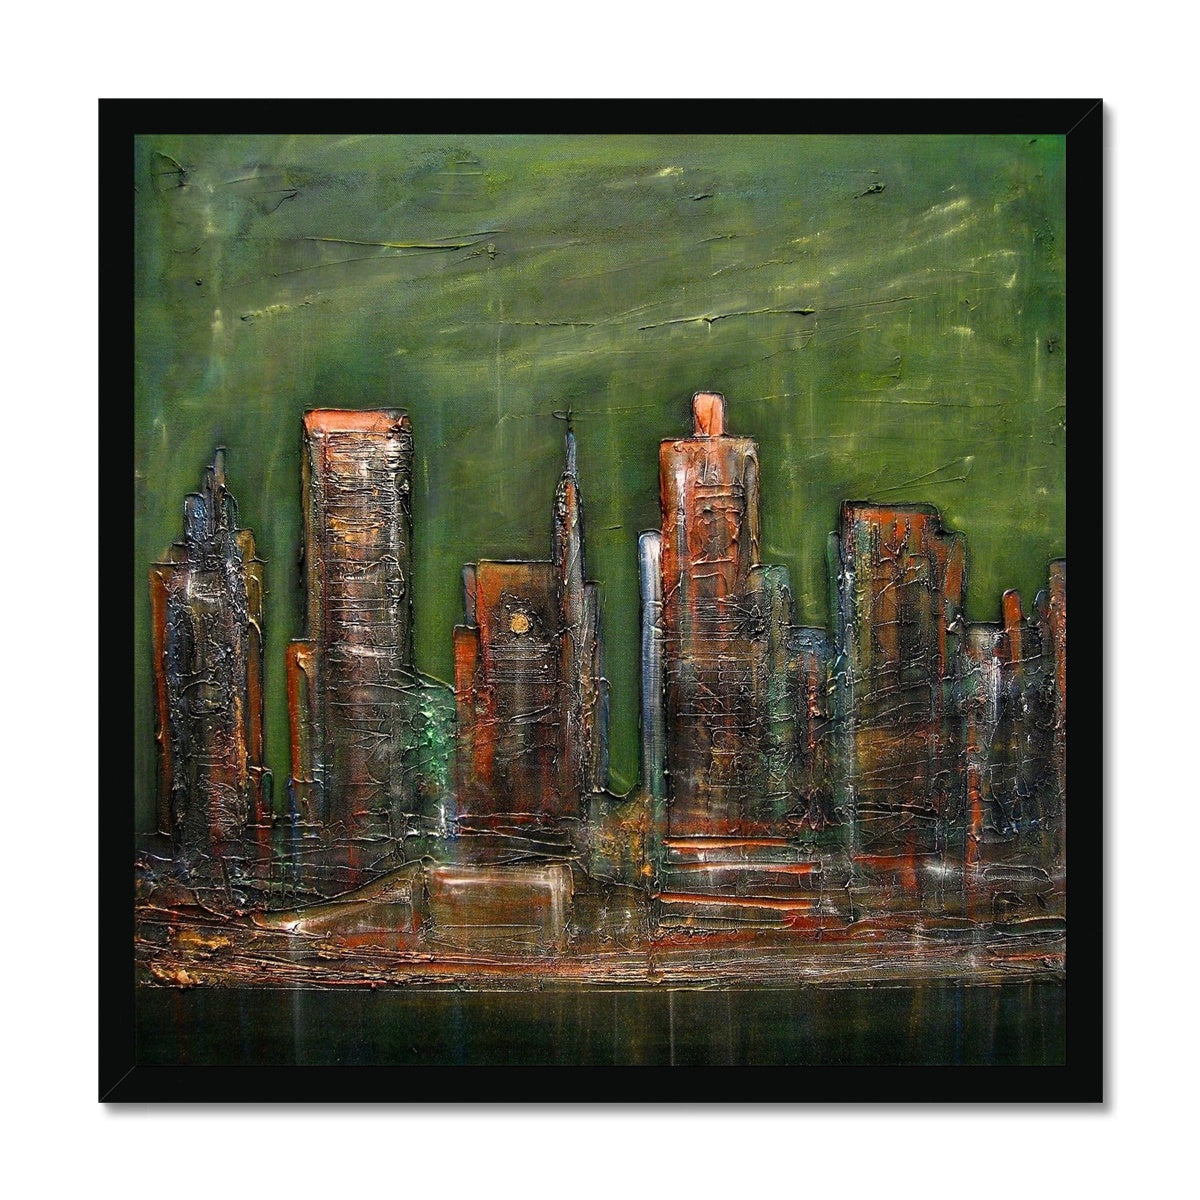 A Neon New York Painting | Framed Prints From Scotland-Framed Prints-World Art Gallery-20"x20"-Black Frame-Paintings, Prints, Homeware, Art Gifts From Scotland By Scottish Artist Kevin Hunter